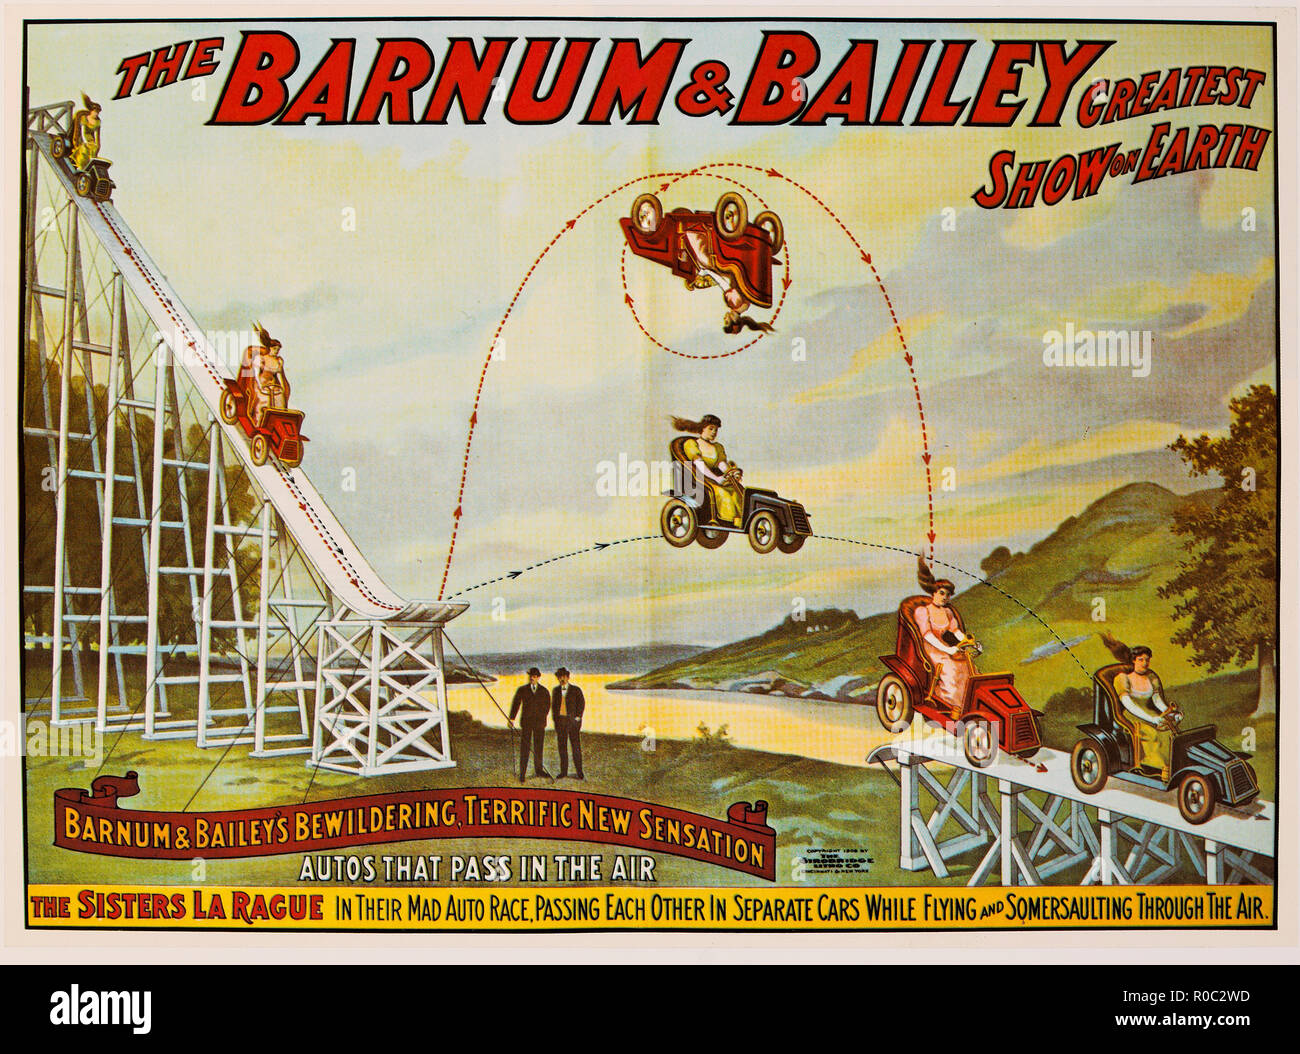 The Barnum & Bailey Greatest Show on Earth, The Sisters La Rague, Circus Poster, Lithograph, 1908 Stock Photo